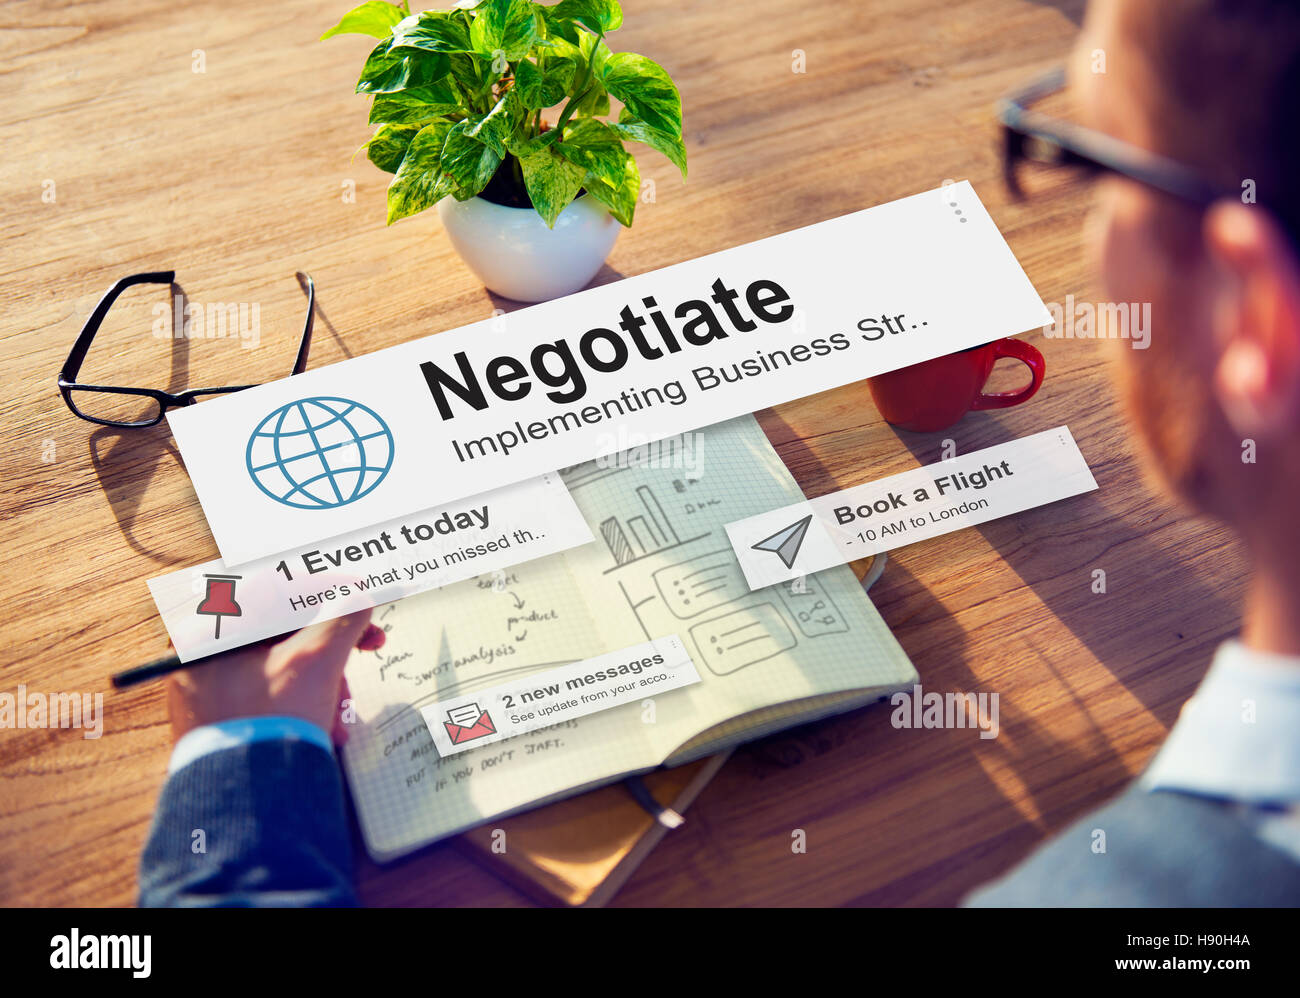 Negotiate Agreement Compromise Reconcile Concept Stock Photo